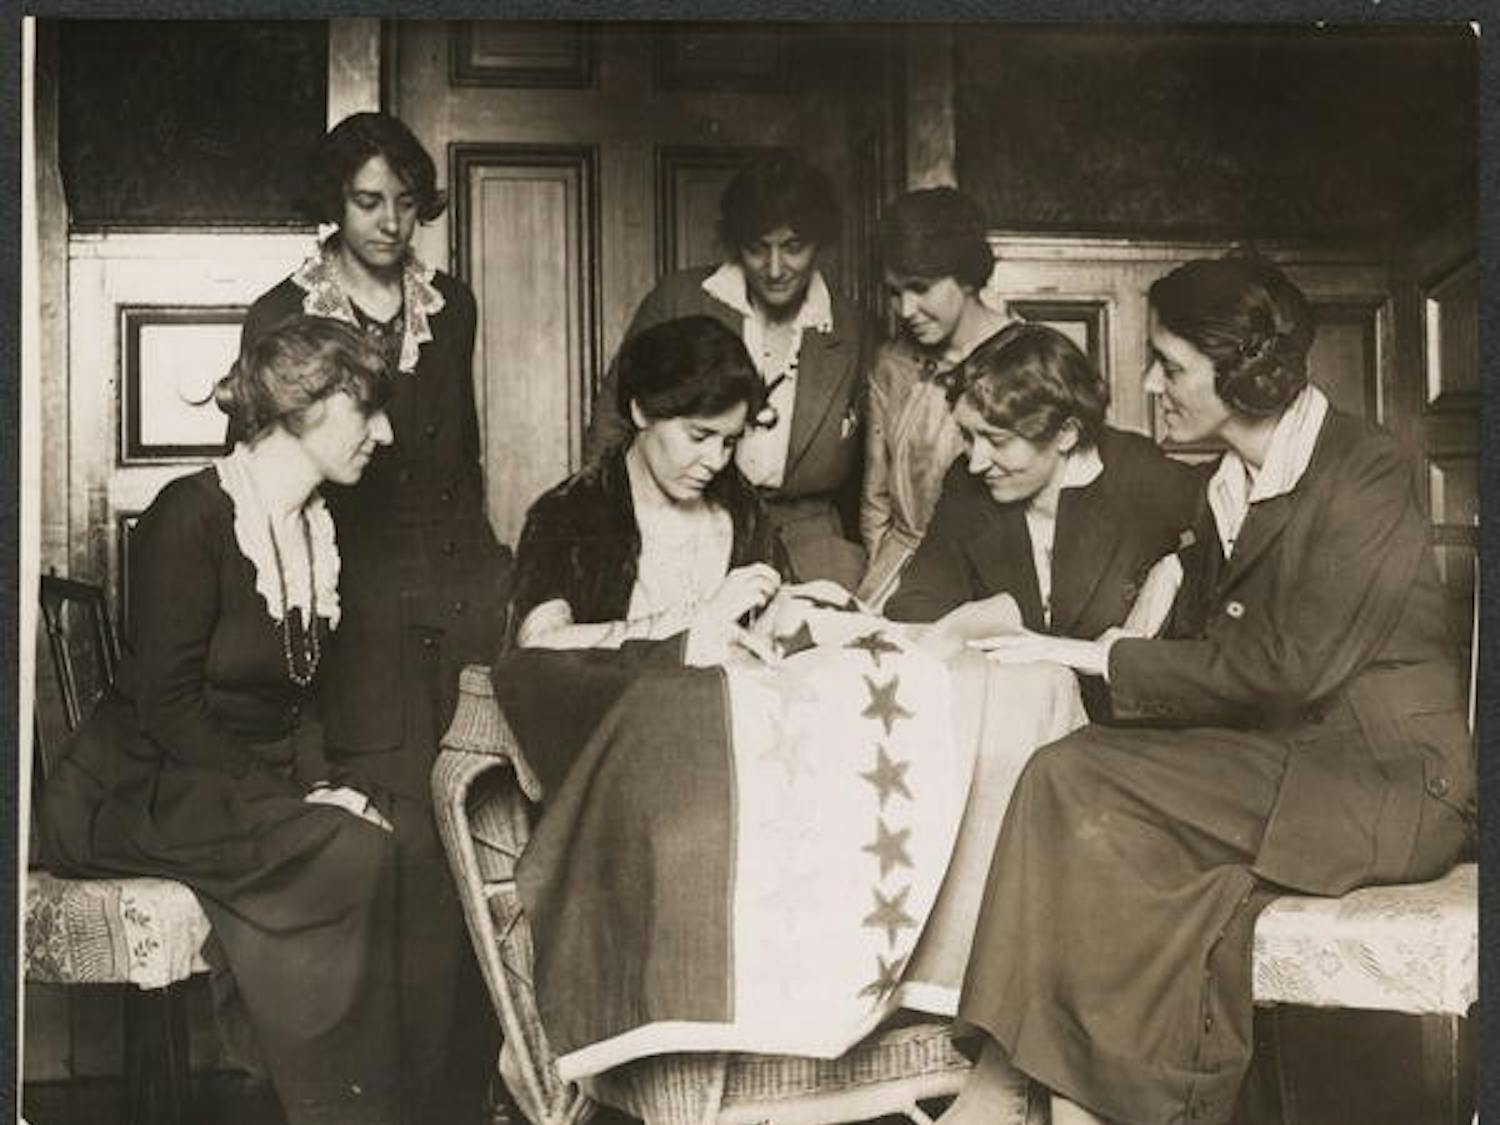 Alice Paul sews a star onto the NWP Ratification Flag, representing another state's ratification of the 19th Amendment. Photo courtesy of The Suffragist Project.